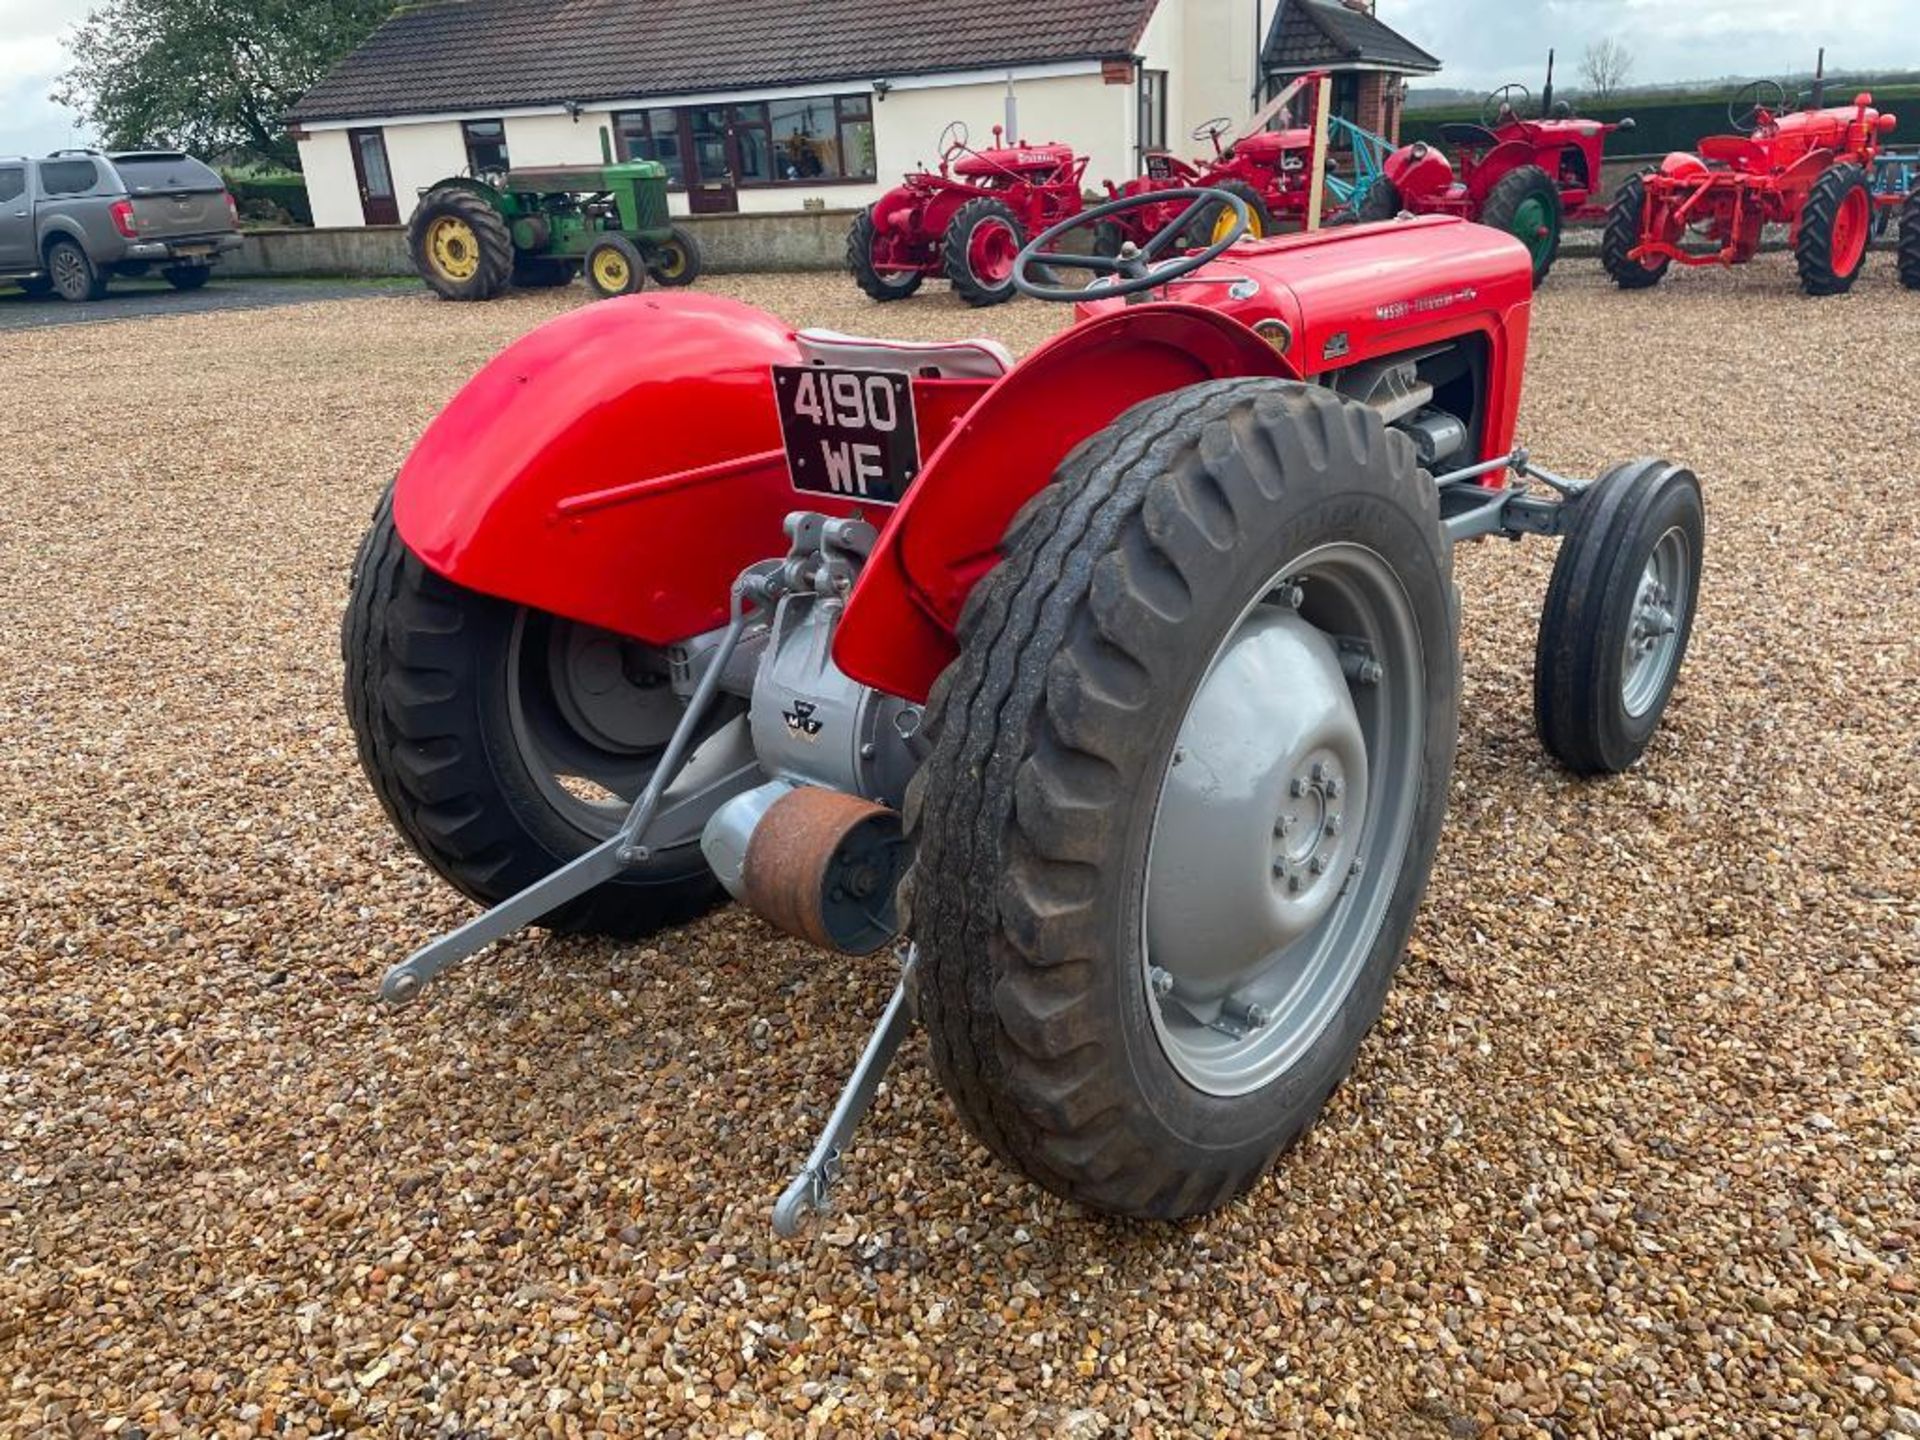 1962 Massey Ferguson 35 Industrial petrol 2wd tractor on 6.00-16 front and 10.00-28IND rear wheels a - Image 7 of 19